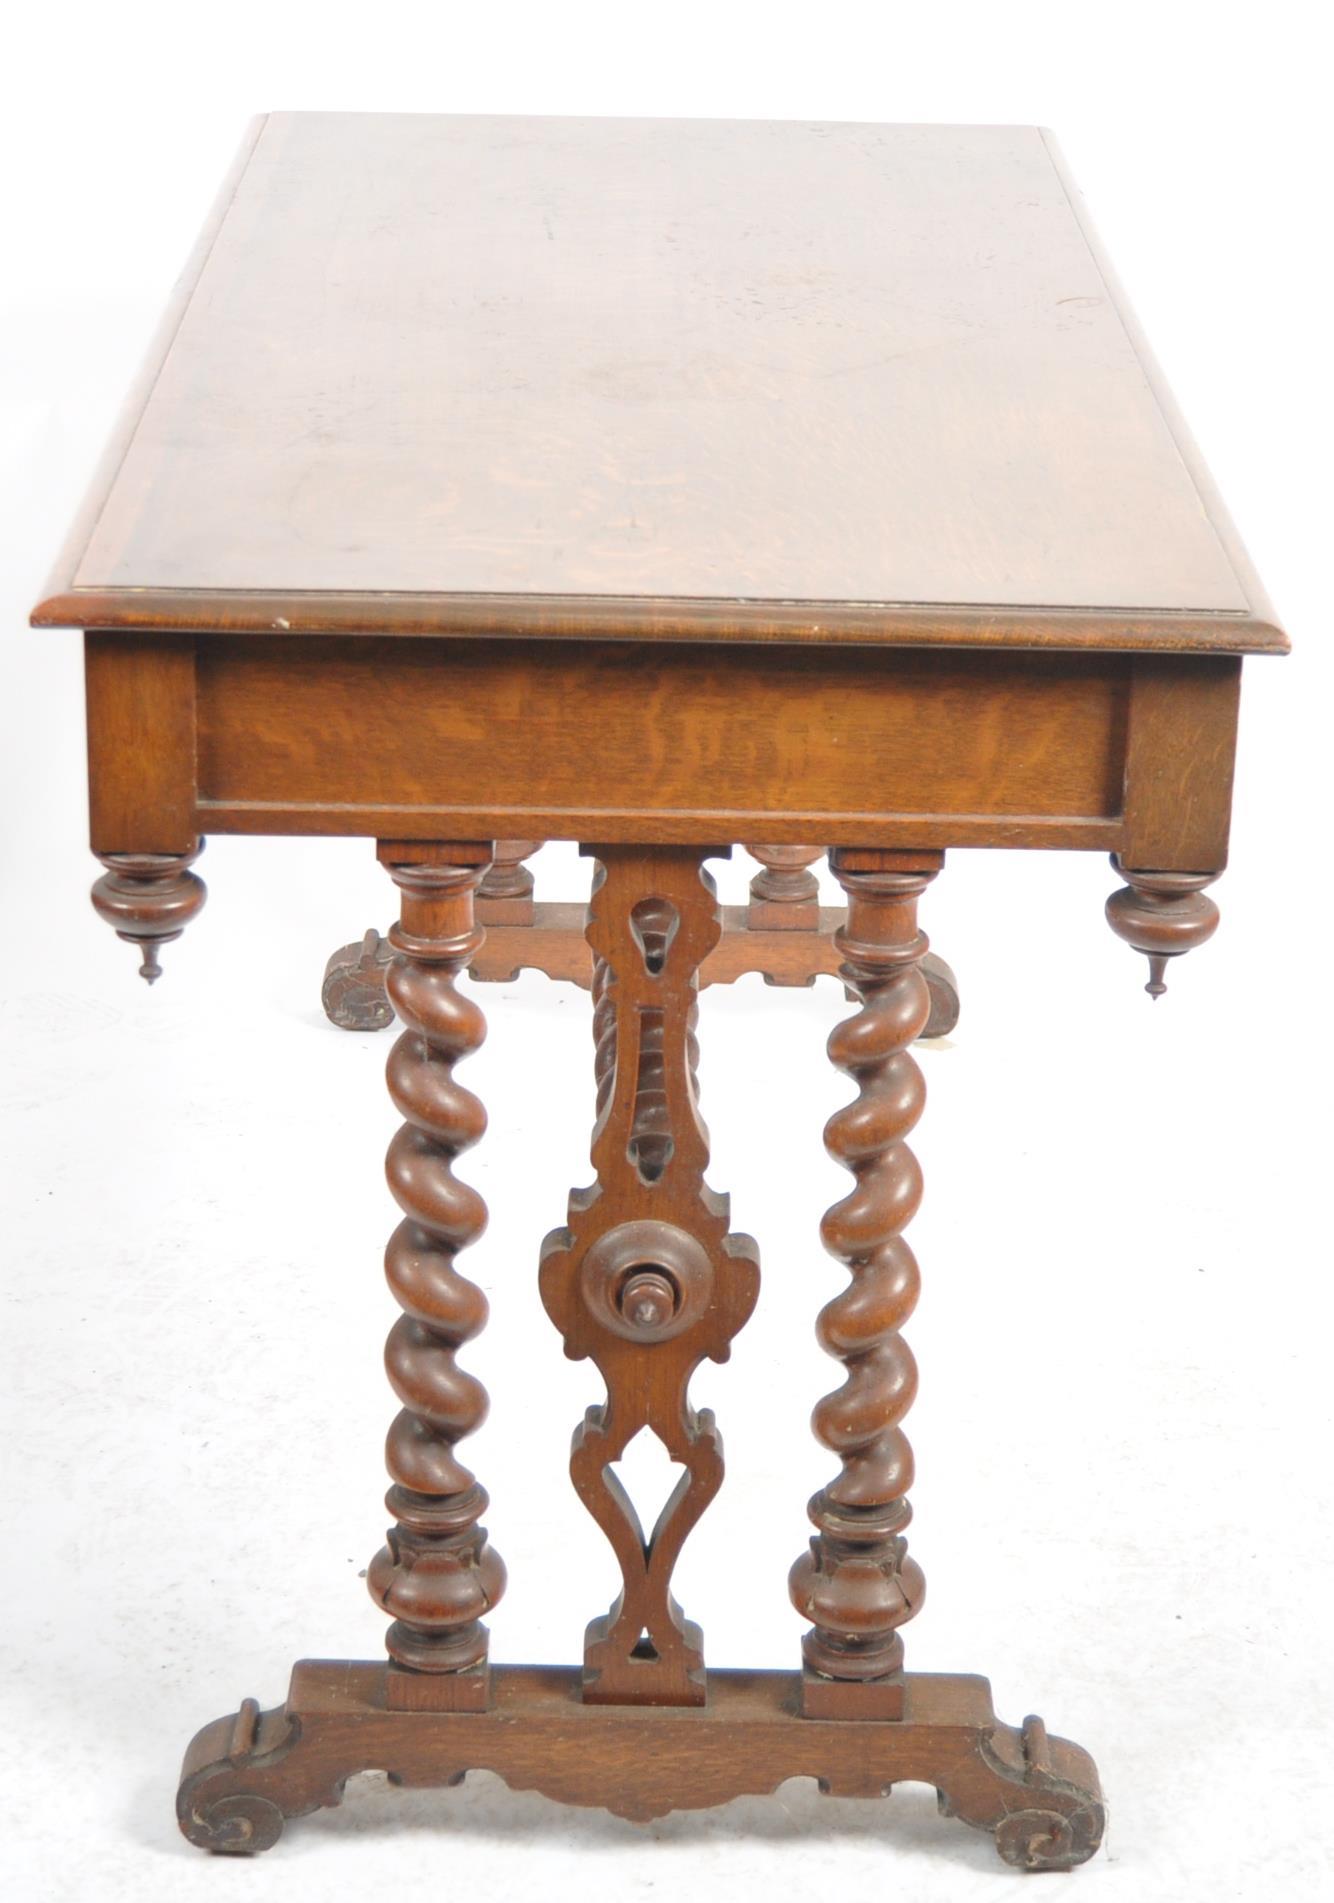 VICTORIAN 19TH CENTURY OAK WRITING TABLE LIBRARY DESK - Image 8 of 8